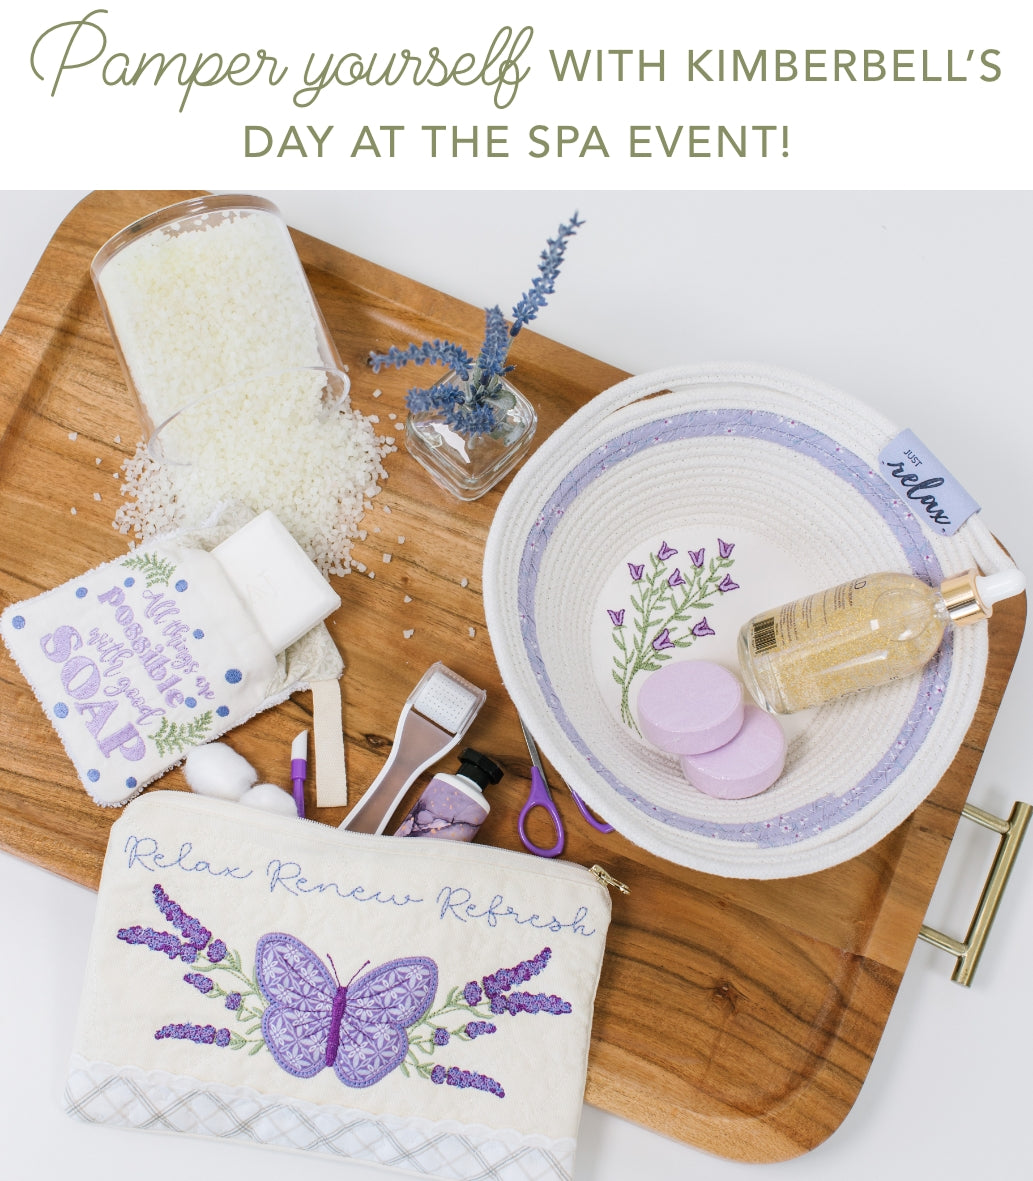 DAY AT THE SPA SUN MAY 19 10:00 - 4:00  KIMBERBELL EVENT - IN PERSON